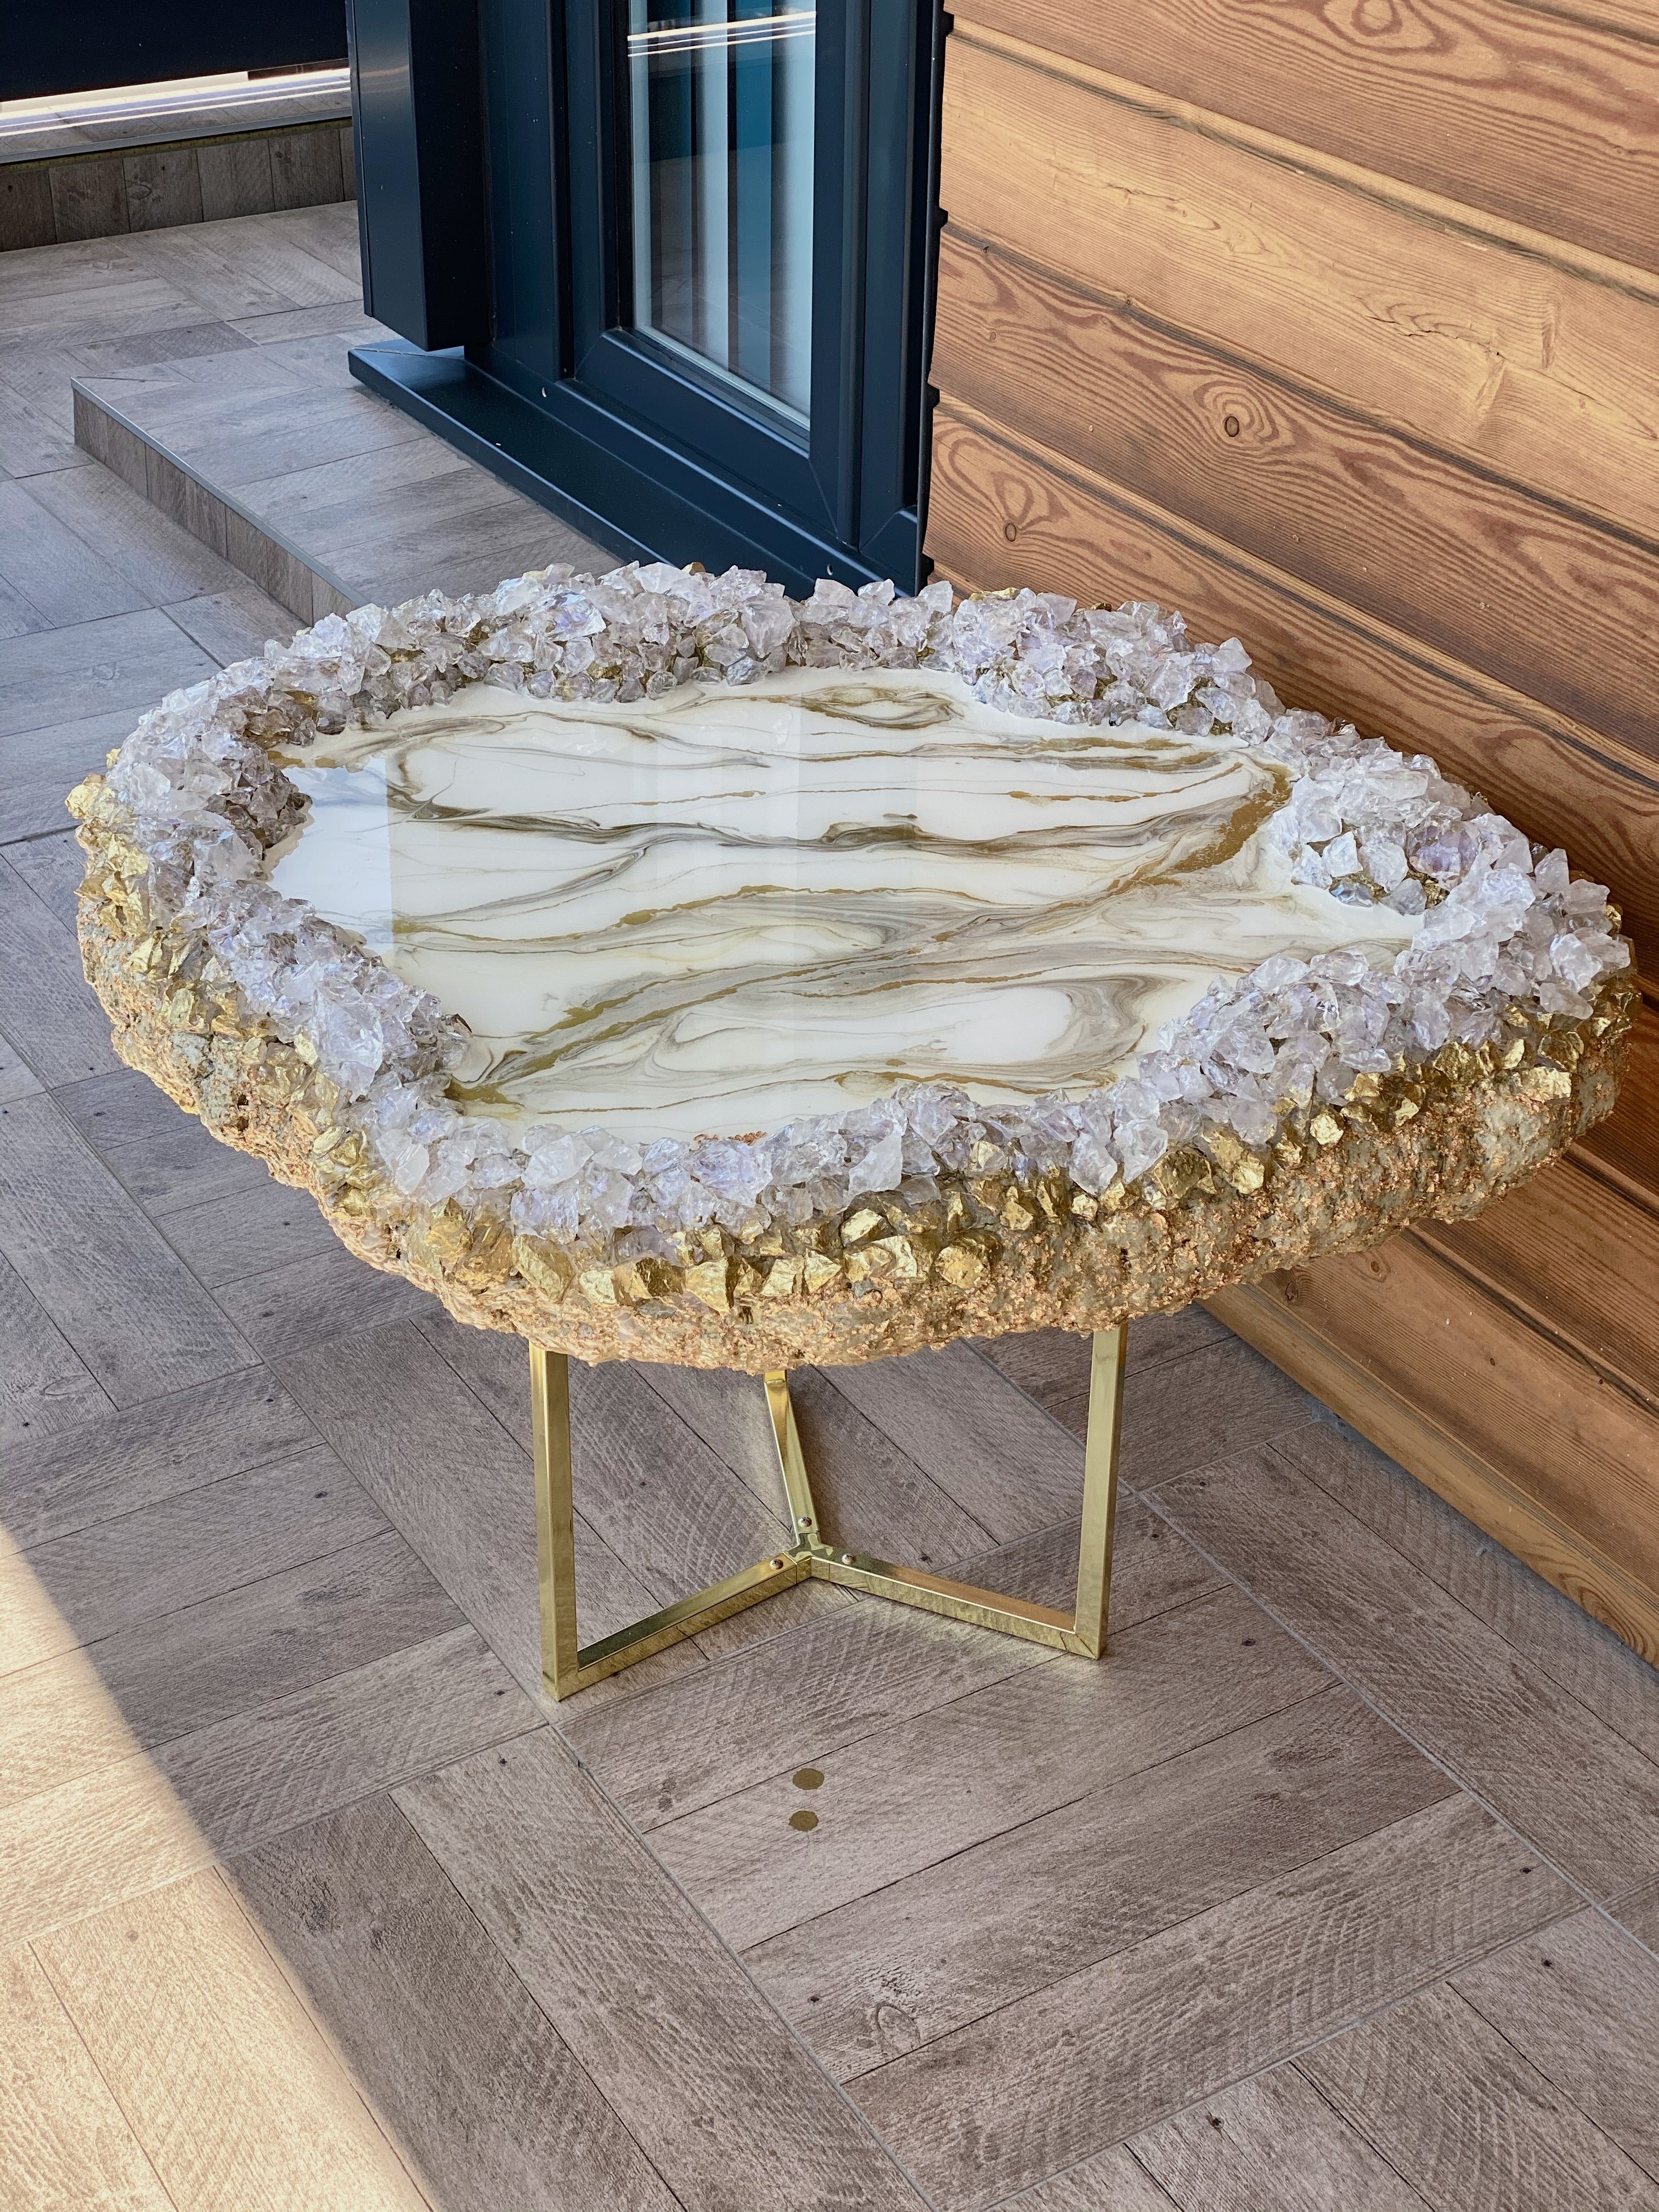 White marble and geode inspired table